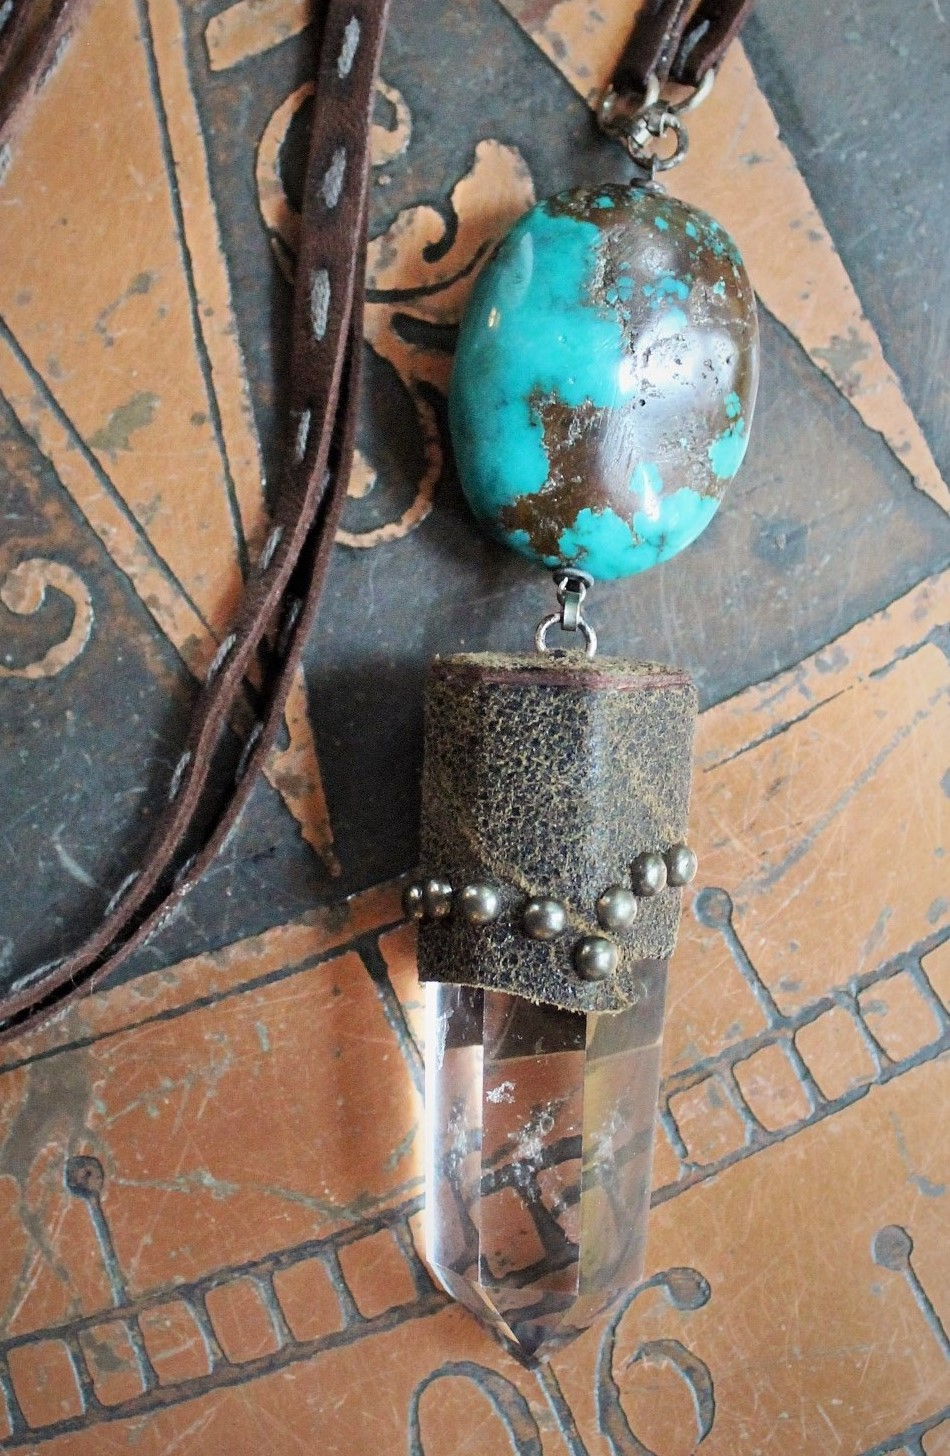 Be Soulful Necklace with Polished Rock Quartz Point, Polished Turquoise Nugget, Hand Stitched Leather Ties, Sterling Toggle Clasp